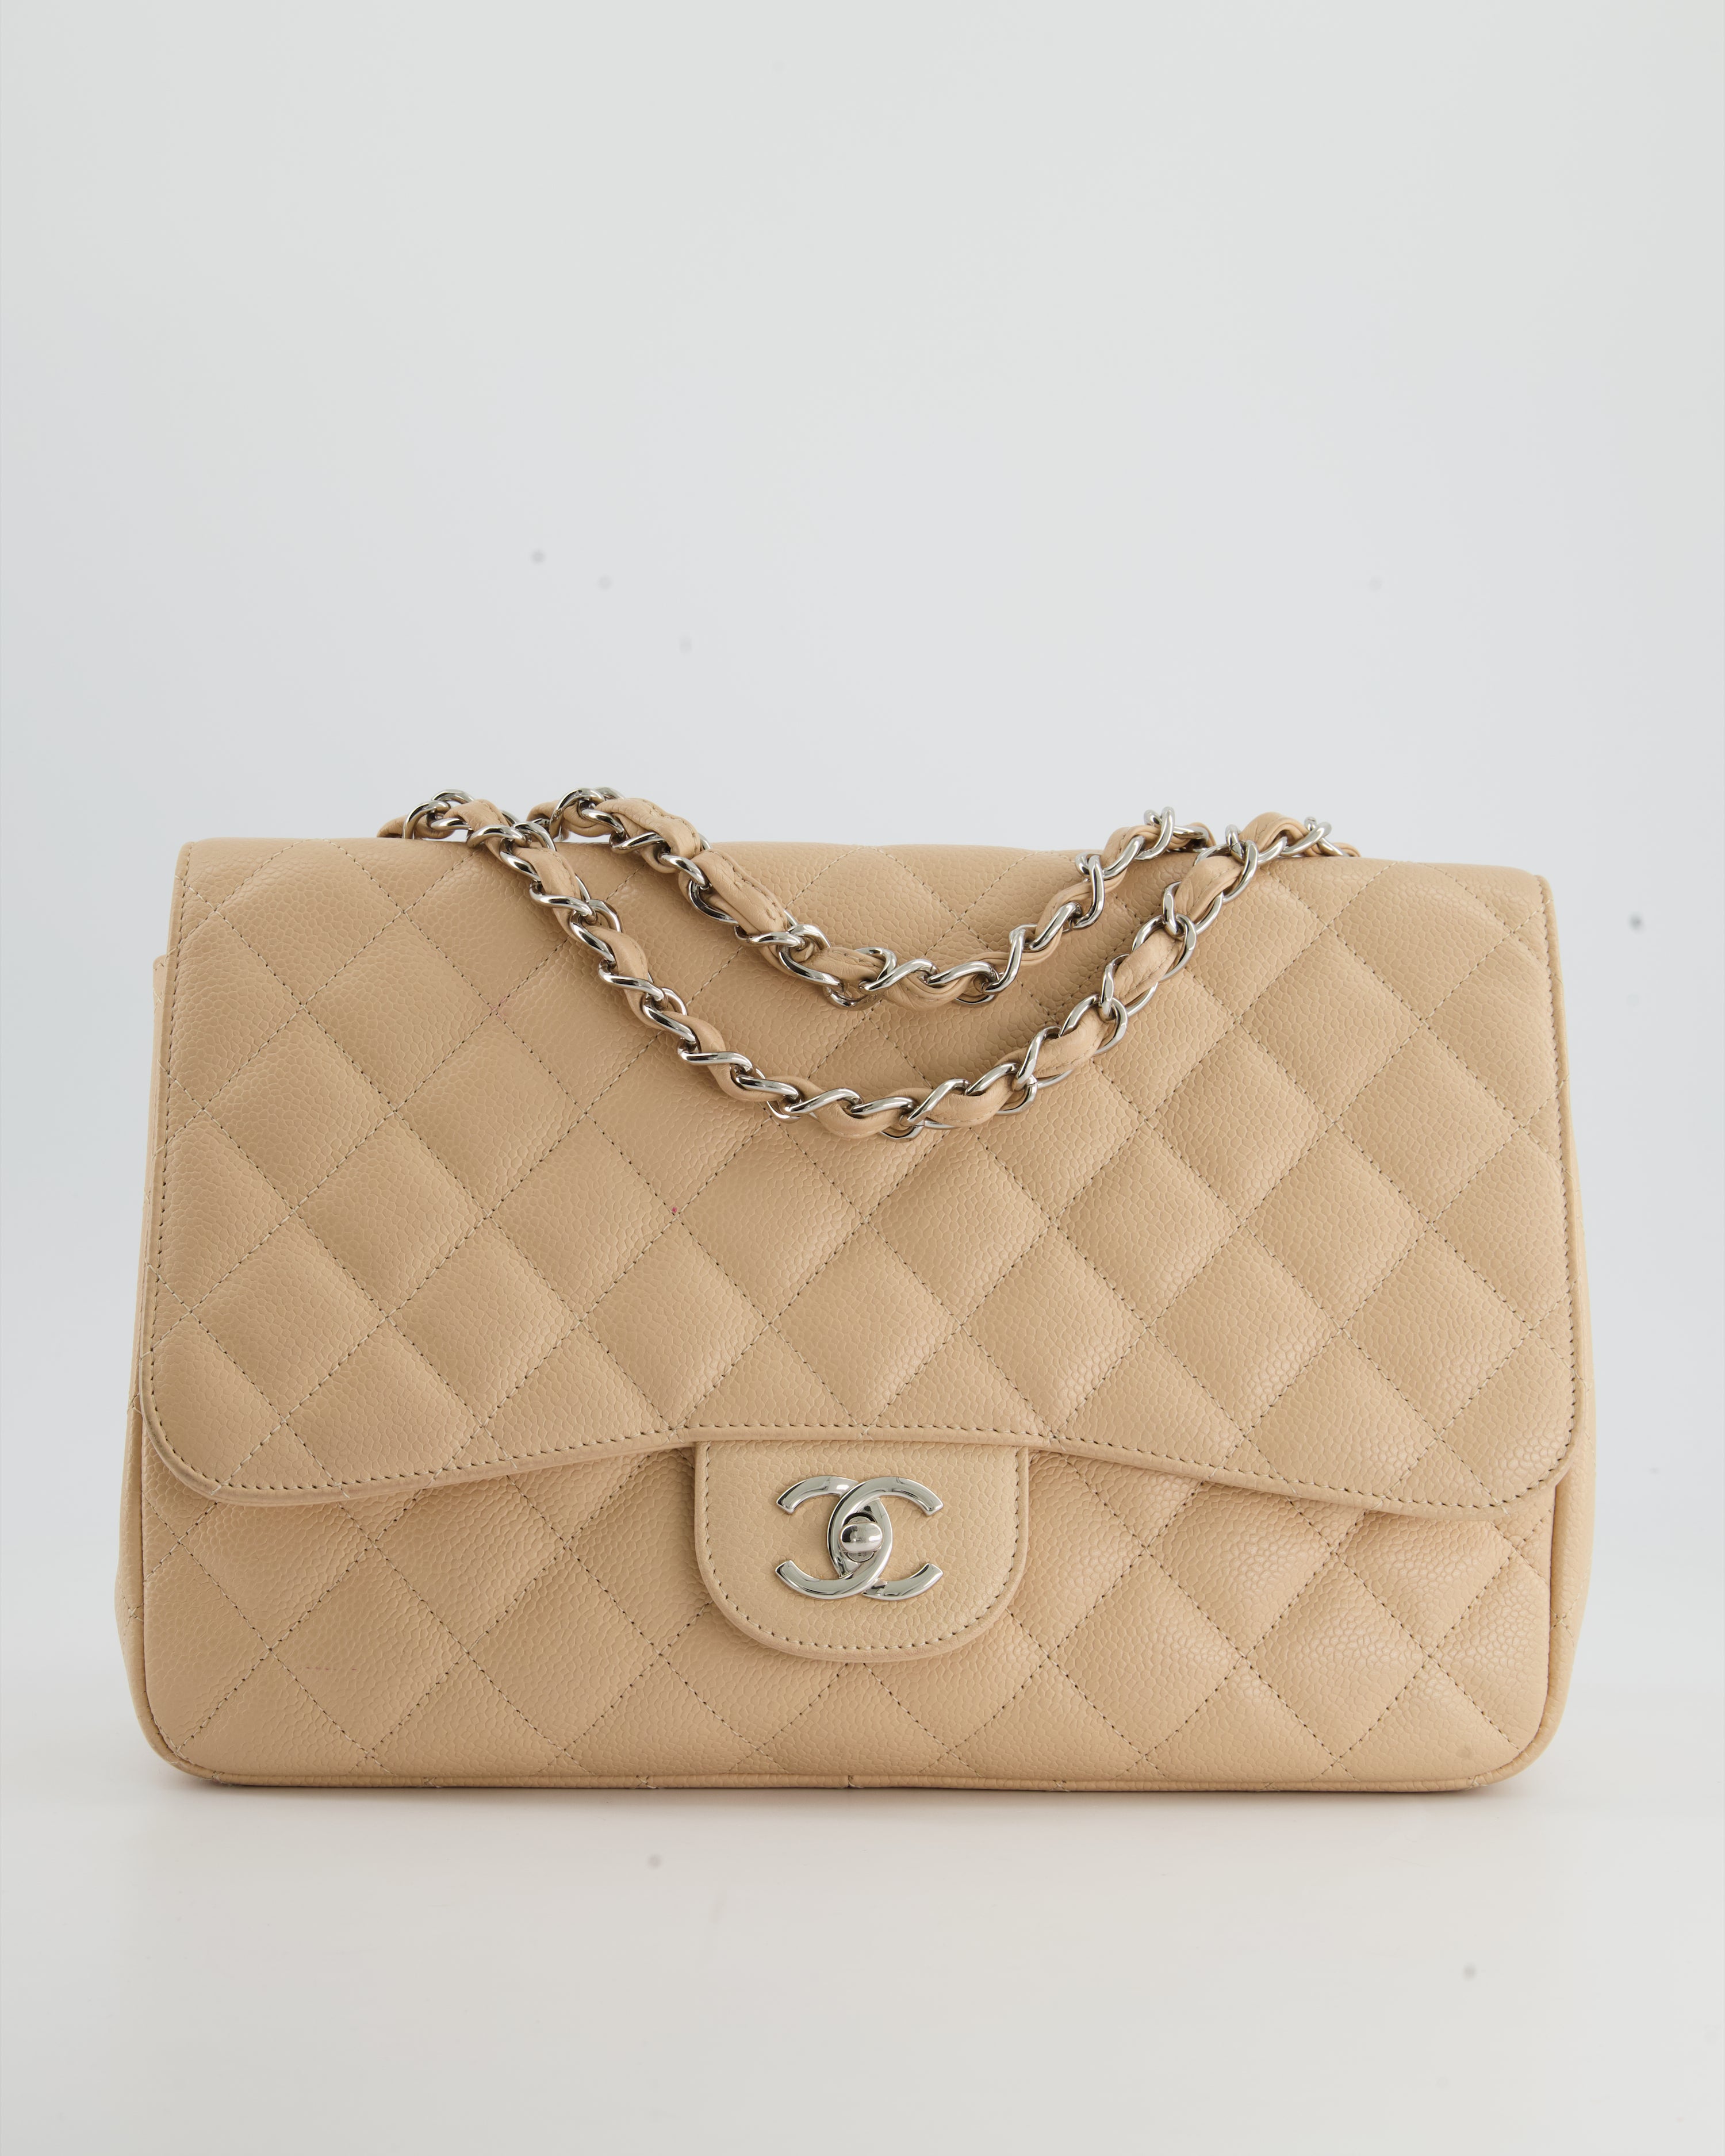 Chanel Classic Flap Beige Caviar Leather Bag Gold Hardware – Mightychic